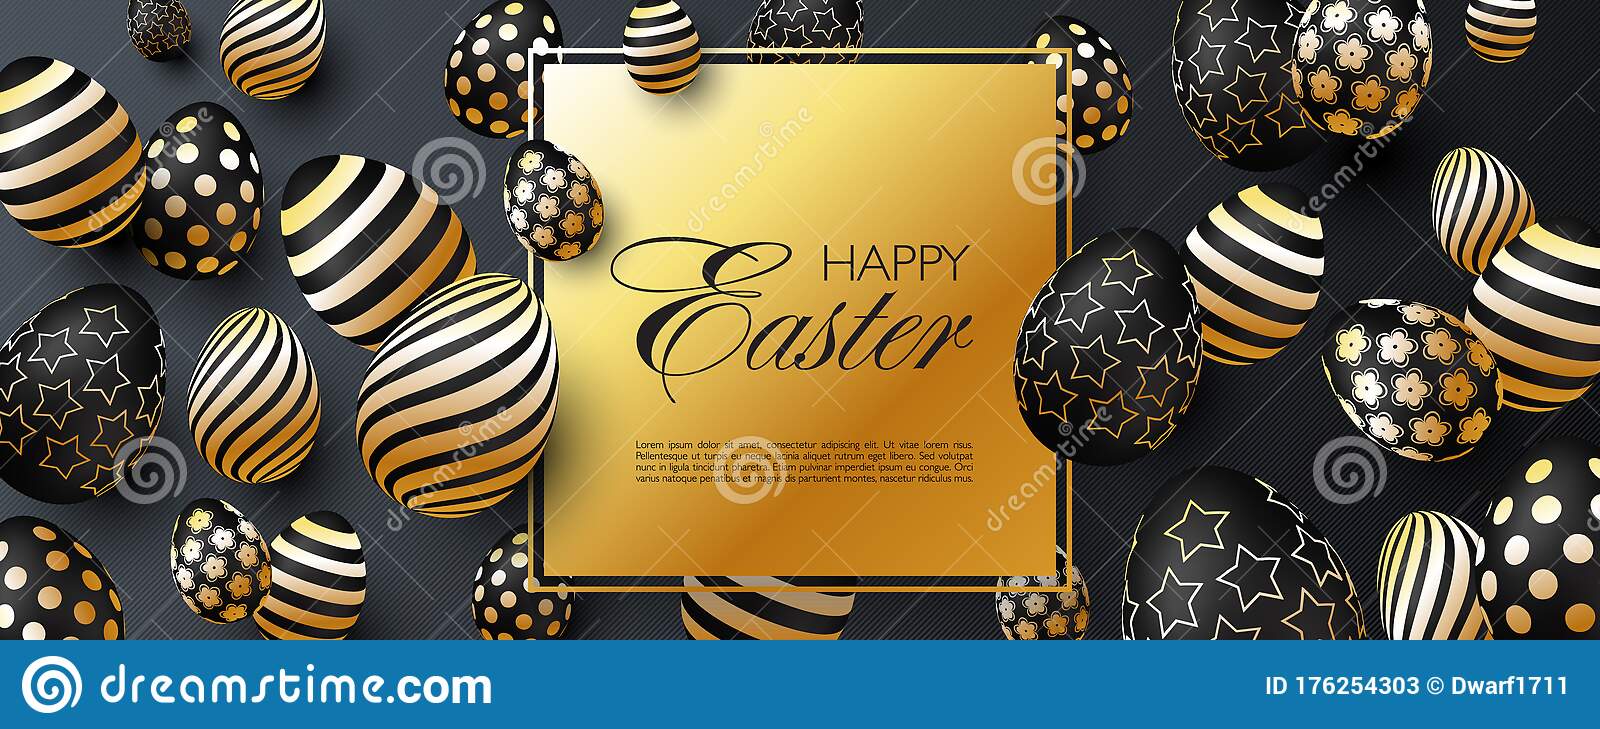 Luxury Happy Easter website header or banner template with realistic 3D black golden eggs on black striped background 